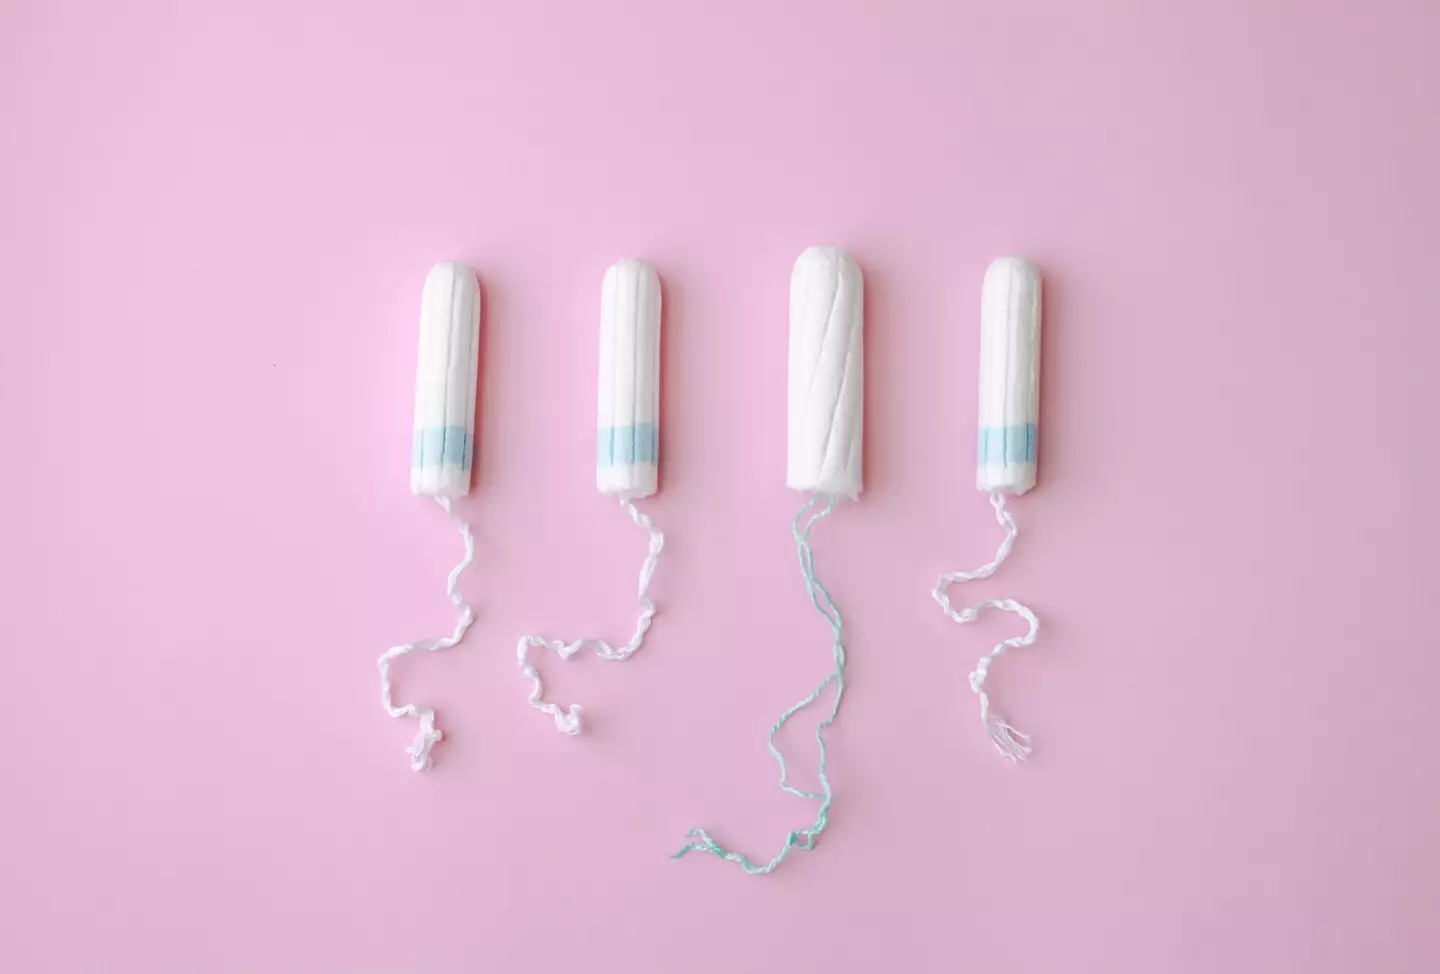 Providing tampons in the gents is a way to help out trans men and non-binary people.